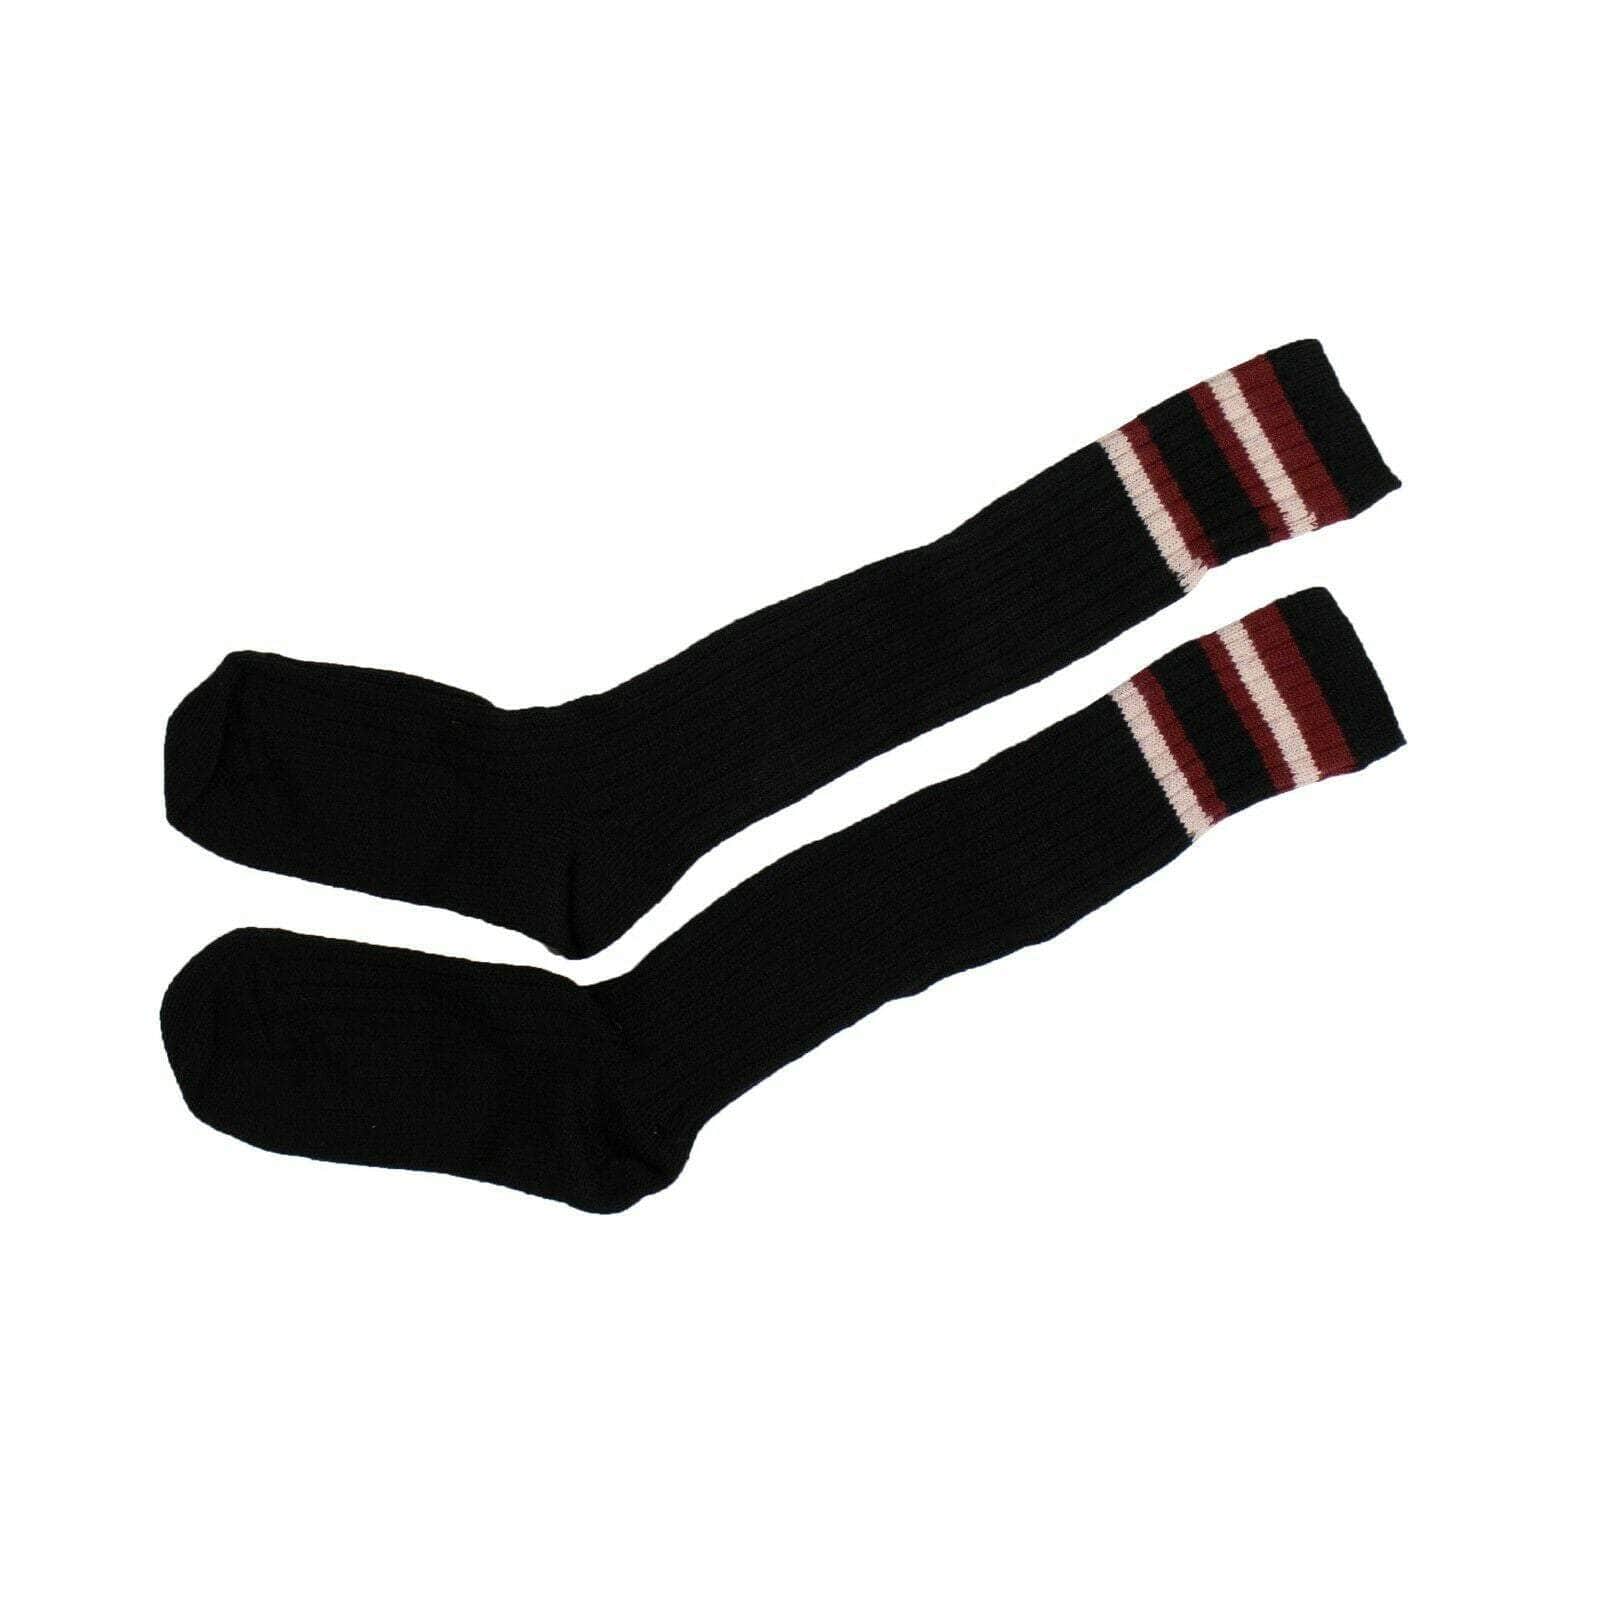 PALM ANGELS couponcollection, gender-mens, main-accessories, mens-socks, palm-angels, size-lxl, under-250 LXL Black/Bordeaux Ribbed Stiped Knee High Socks 82NGG-PA-3078/LXL 82NGG-PA-3078/LXL